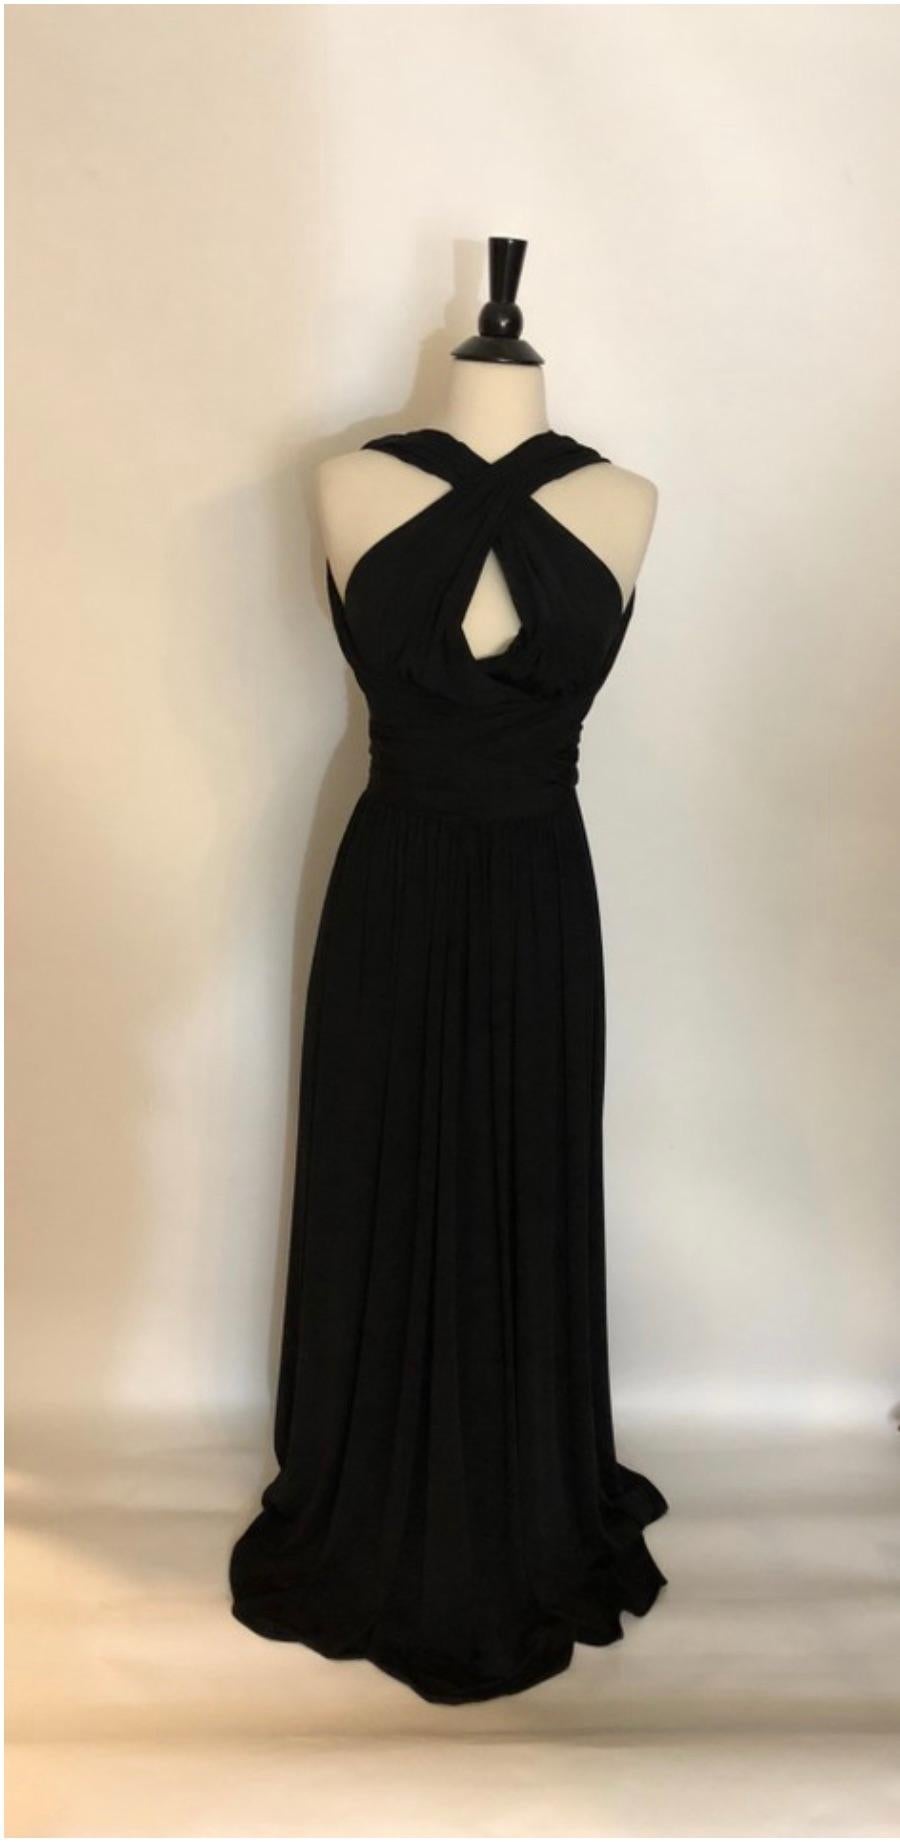 MODEL - Halston Heritage Cutout Knotted Stretch-Jersey Gown in Black

CONDITION - Looks NEW. No signs of wear!

SKU - 2202.1

ORIGINAL/CURRENT RETAIL PRICE - 495 + tax

SIZE - 2

MATERIAL - Polyester and Spandex

COLOR - Black

MODEL DETAILS - Full